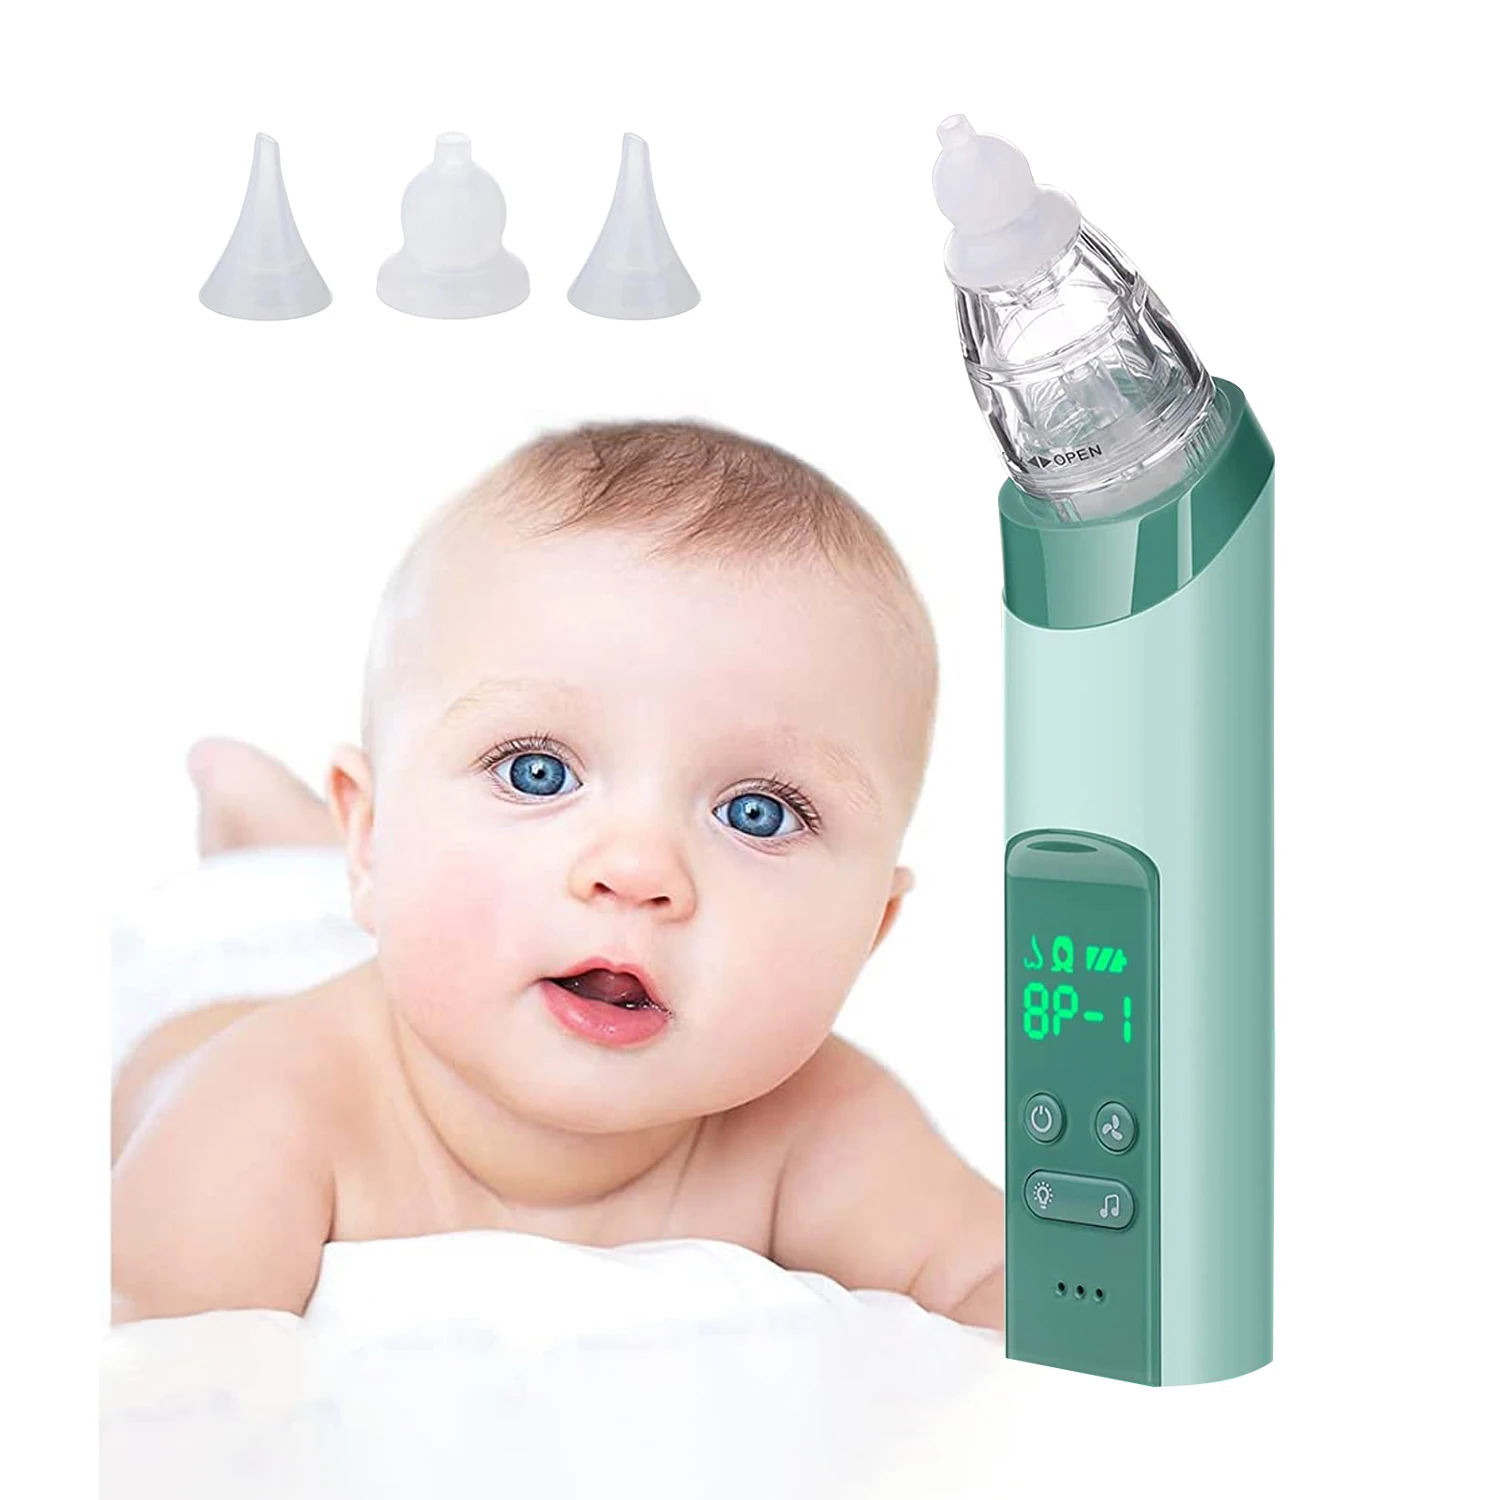 

Oem 4 Button And Lcd Backlight Panel Snot Sucker Mucus Three-Speed Suction Babi Nasal Aspirator With Music Speaker And Light, White/green